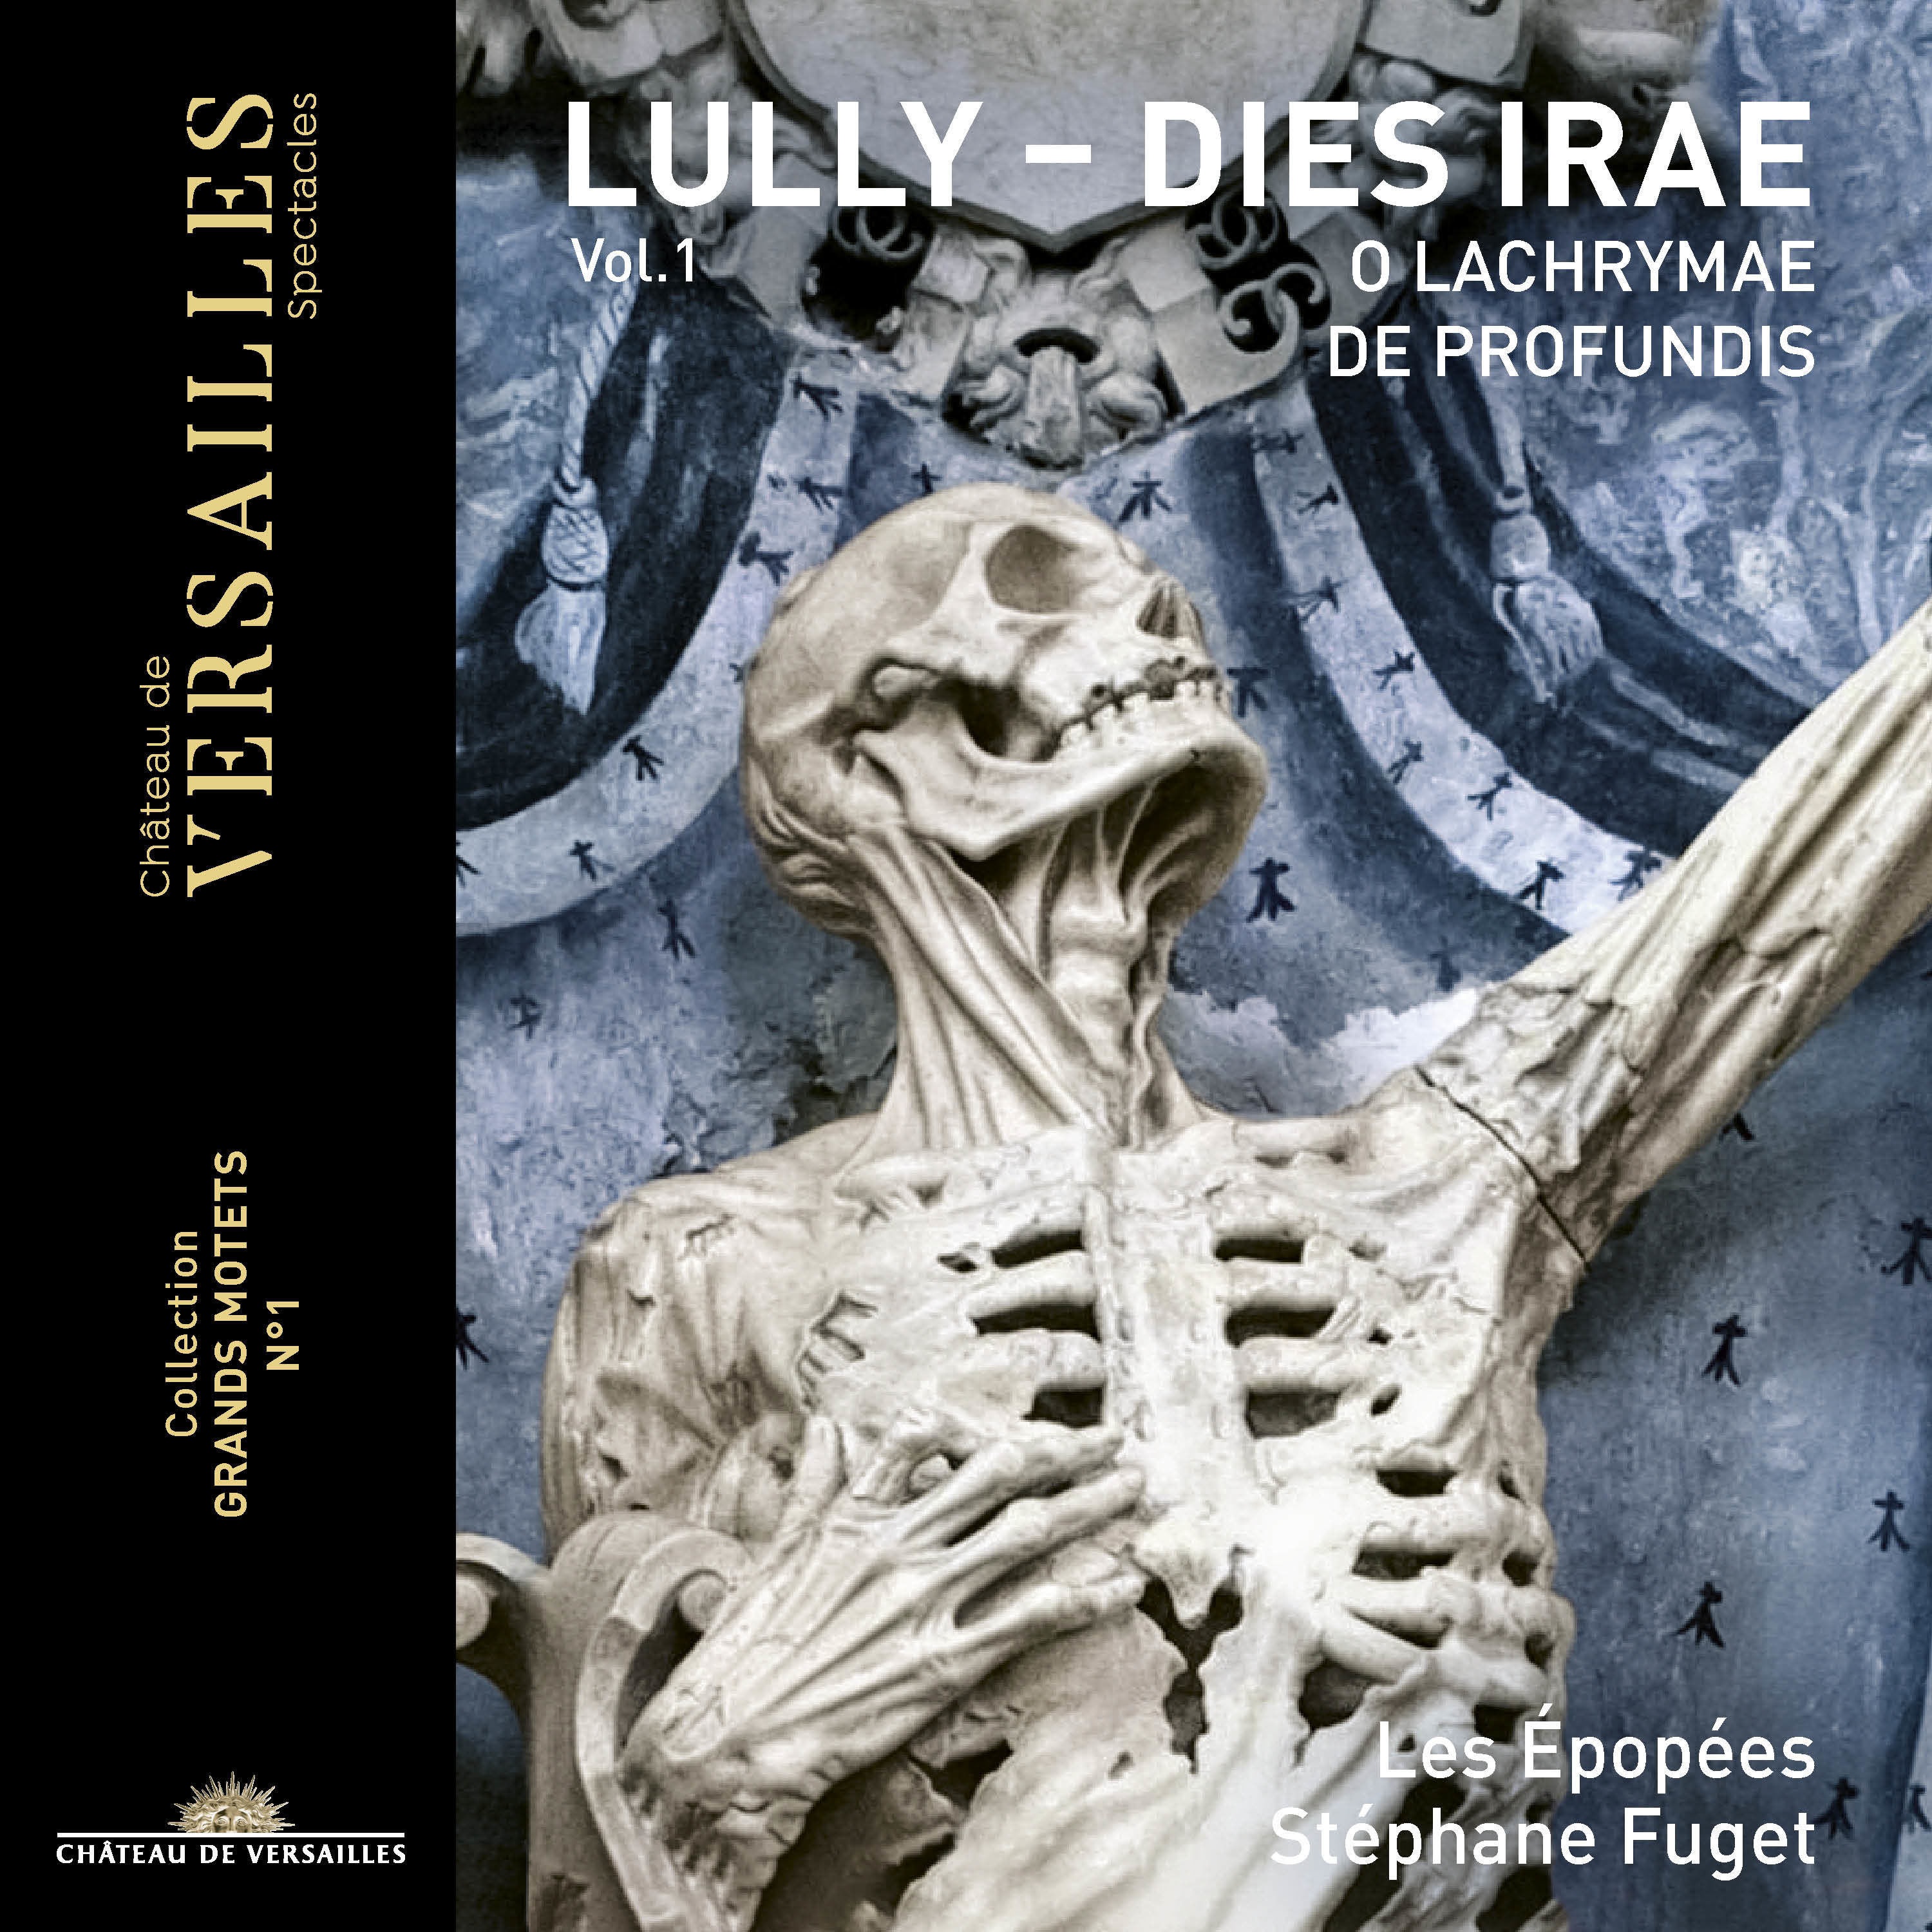 Les Epopees & Stephane Fuget – Lully: Dies Irae (Collection Grands motets, Vol. 1) (2021) [FLAC 24bit/88,2kHz]